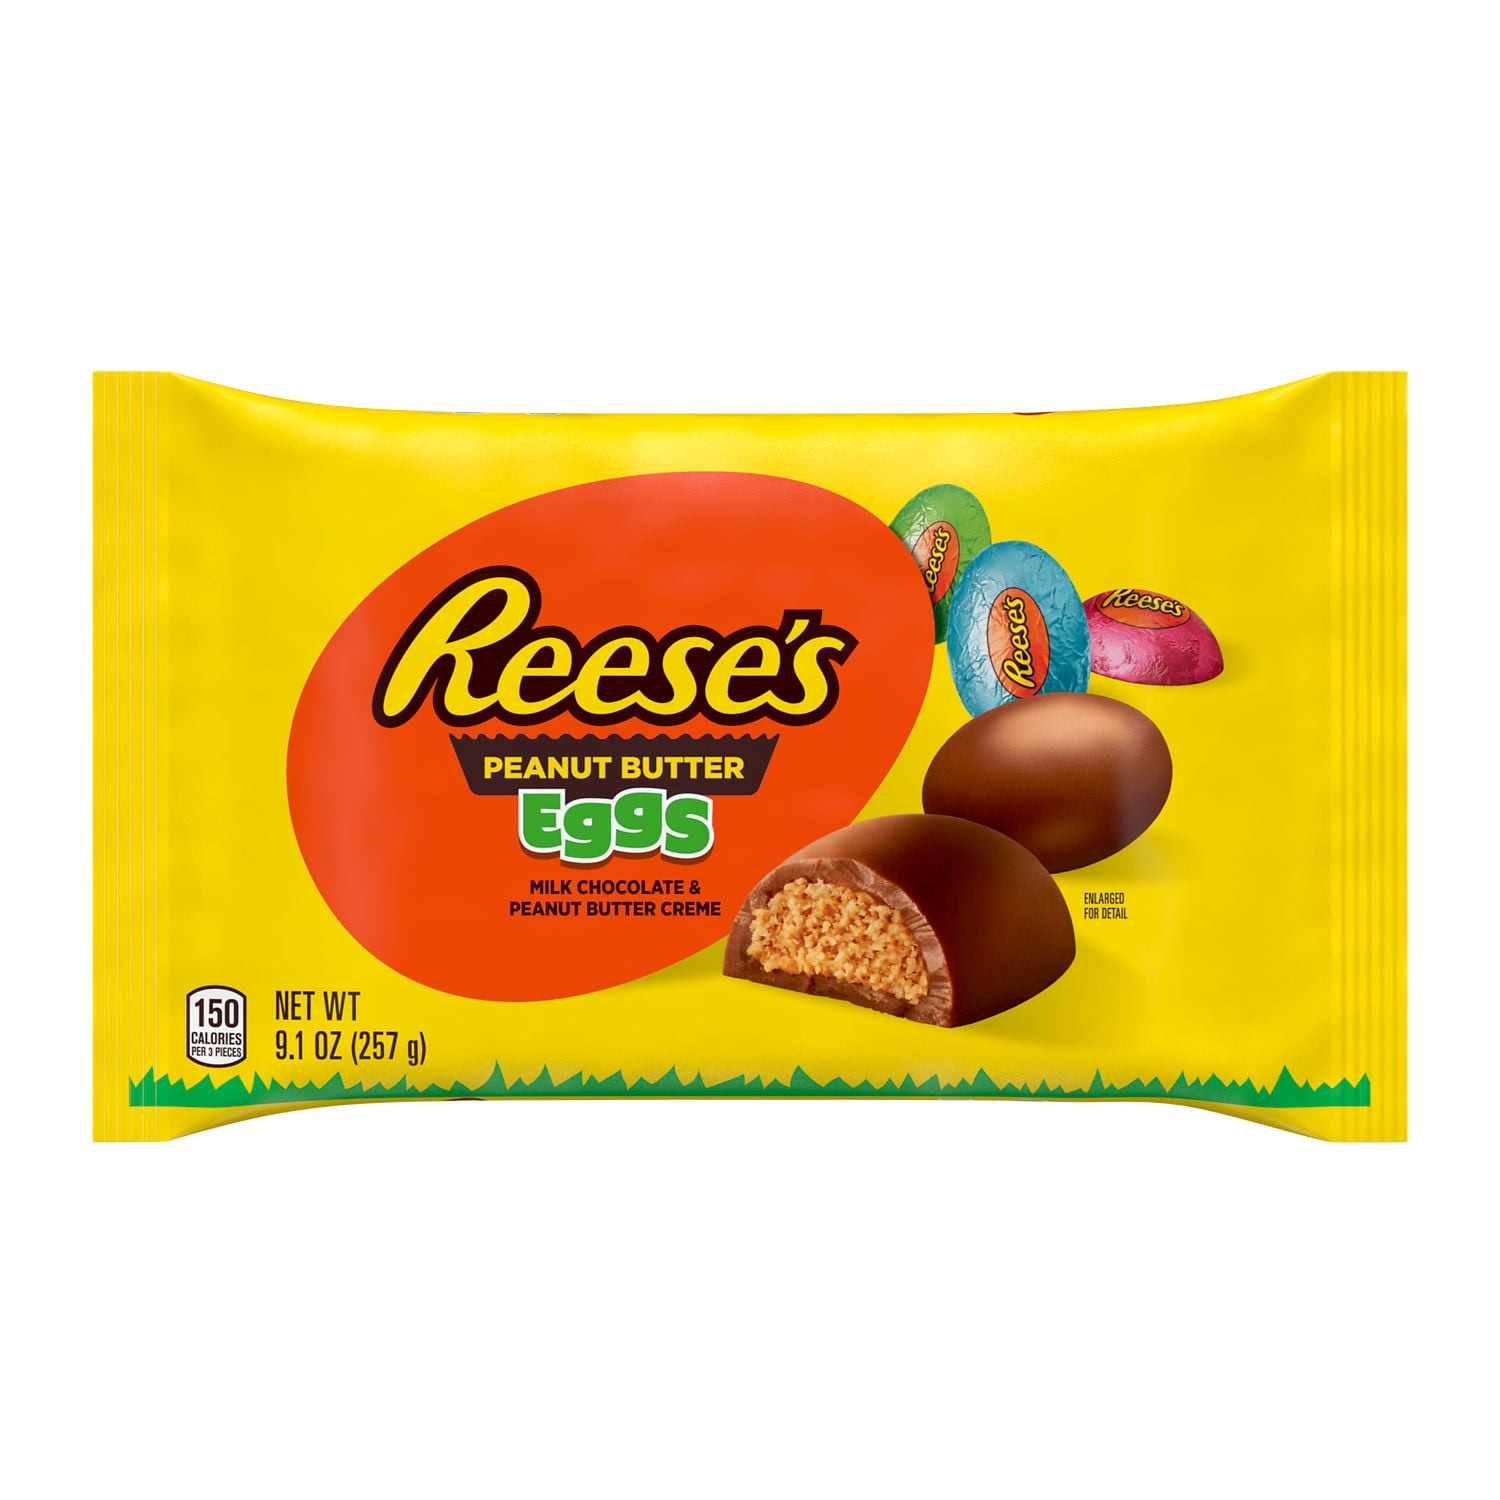 REESE'S, Milk Chocolate Peanut Butter Creme Eggs, Easter Candy, 9.1 oz, Bag